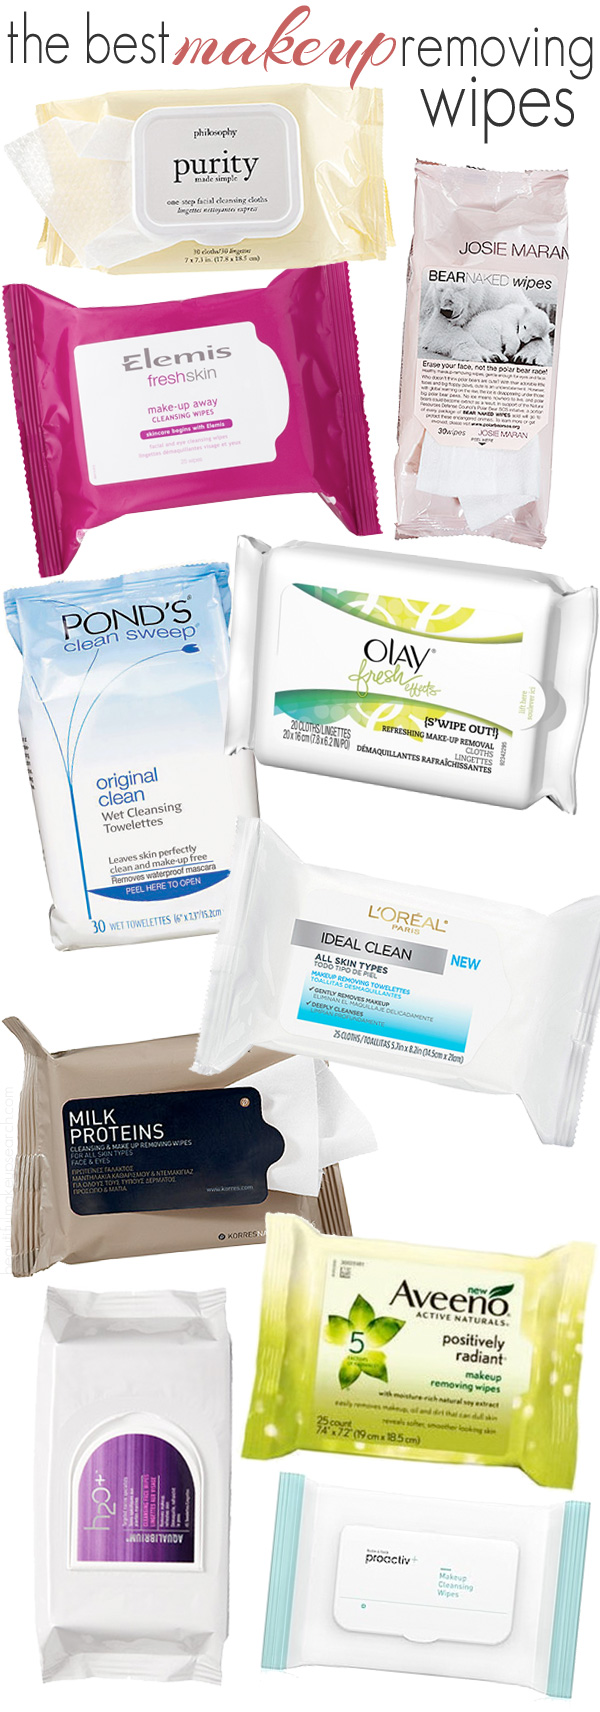 The best makeup removing wipes.